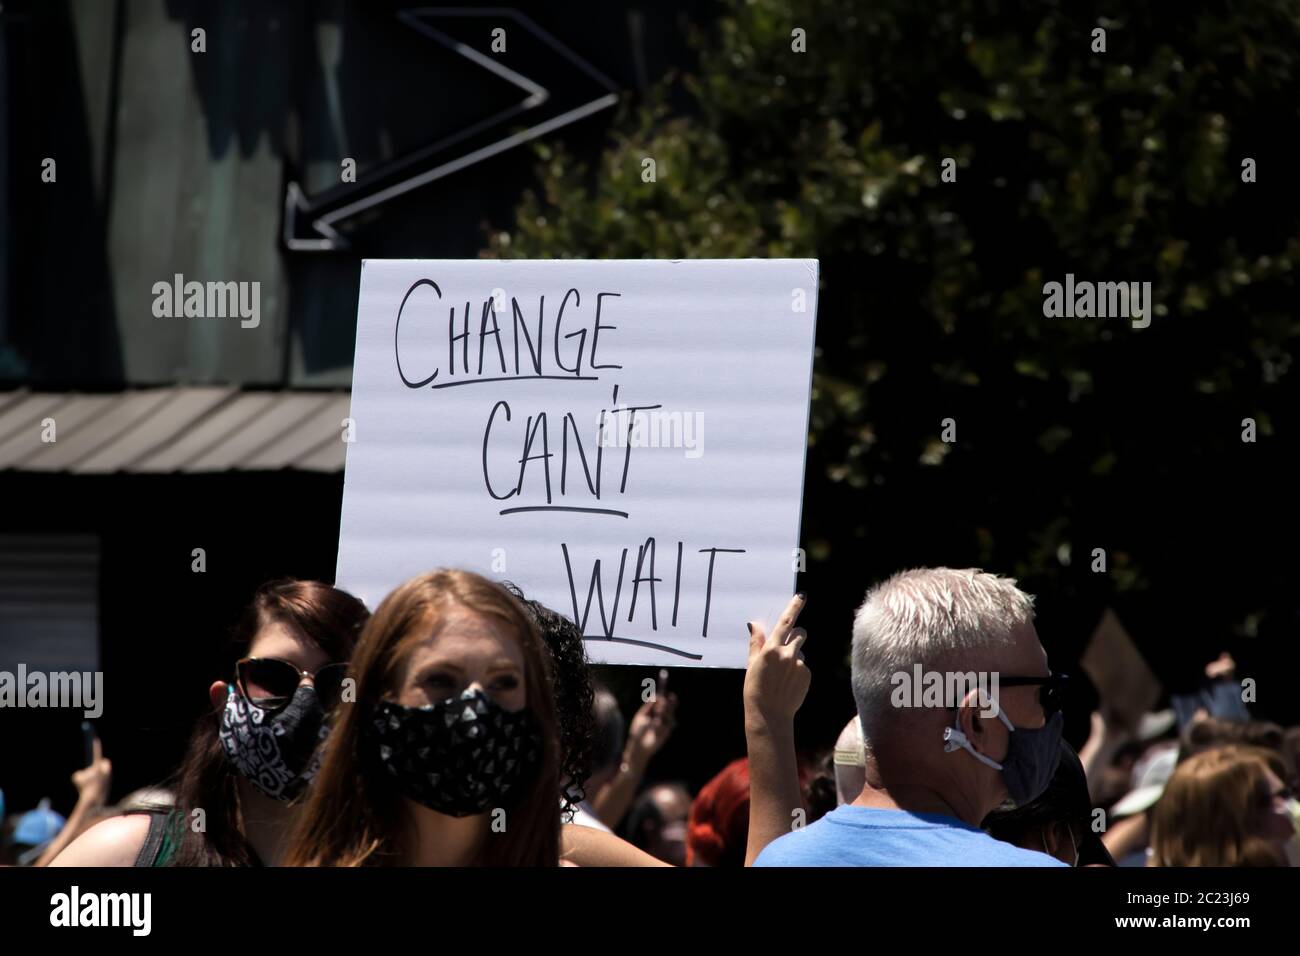 05-30-2020 Tulsa USA Change Can't Wait sign at BLM protest with blurred protesters  around it Stock Photo